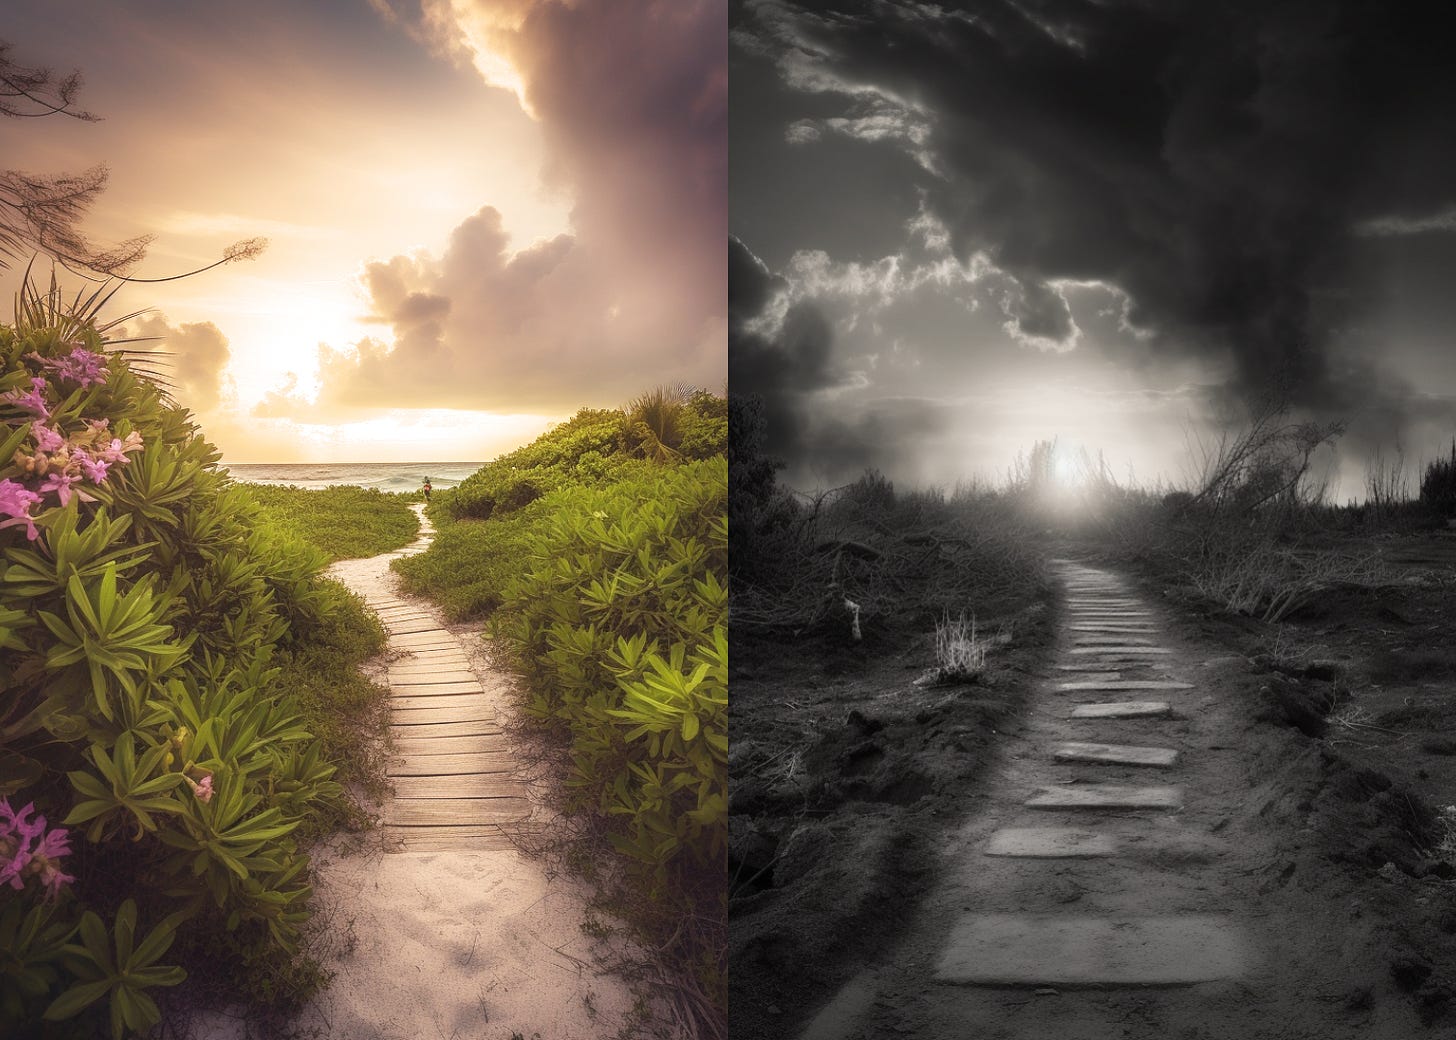 Path to paradise on one side and apocalypse on the other